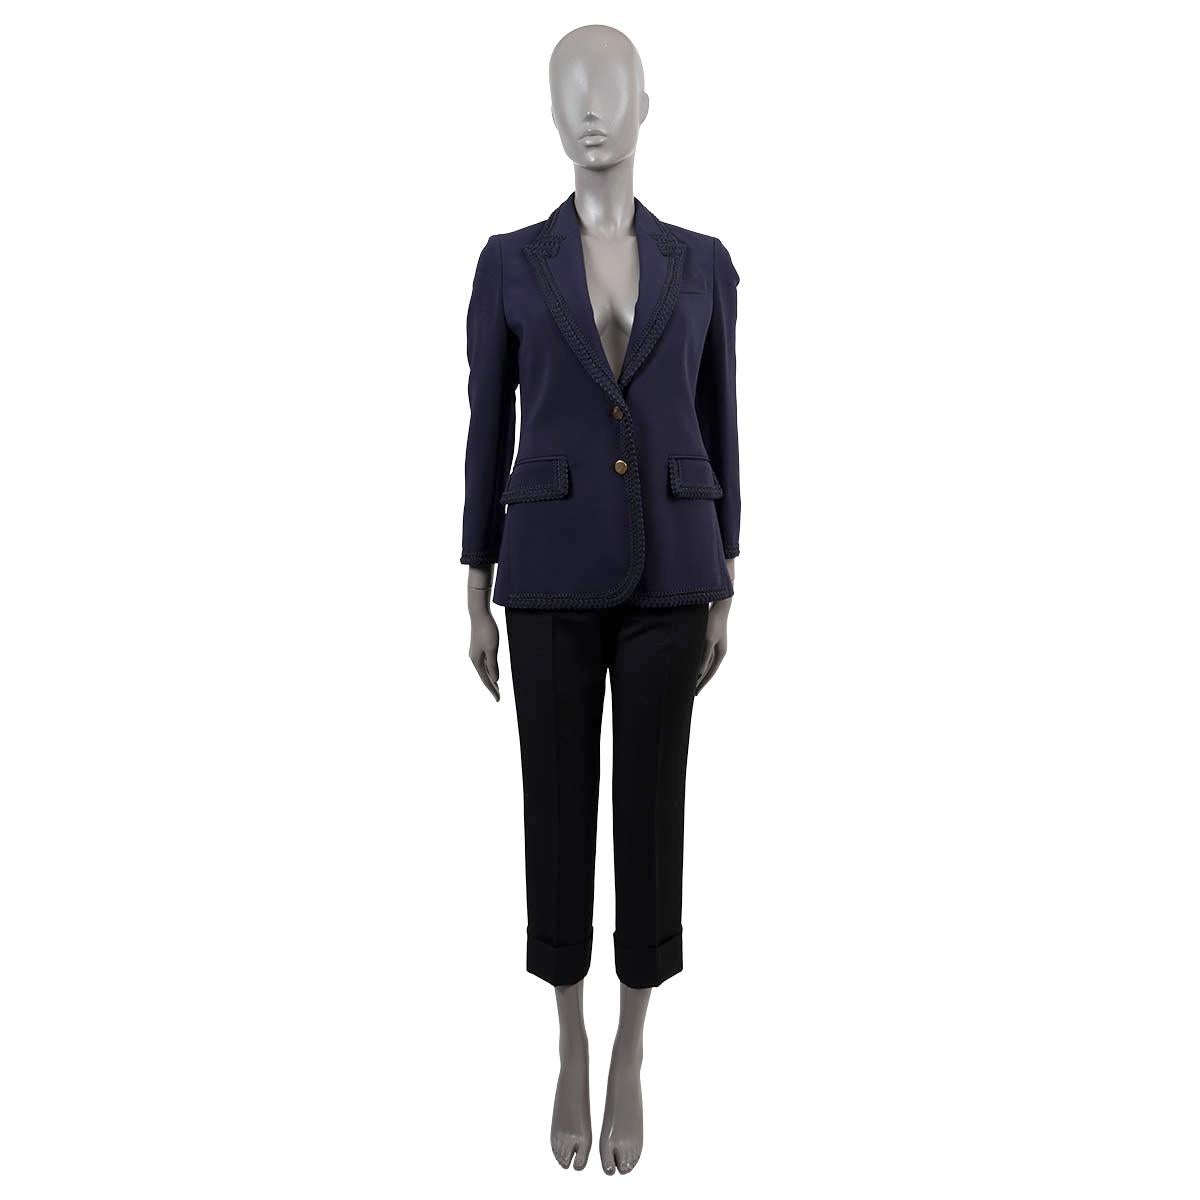 100% authentic Gucci passementrie trim stretch cady blazer navy blue viscose (97%) and elastane (3%). Features two patch pockets and one chest pocket. Opens with two golden buttons on the front. Lined in acetate (69%), cotton (19%) and polyester